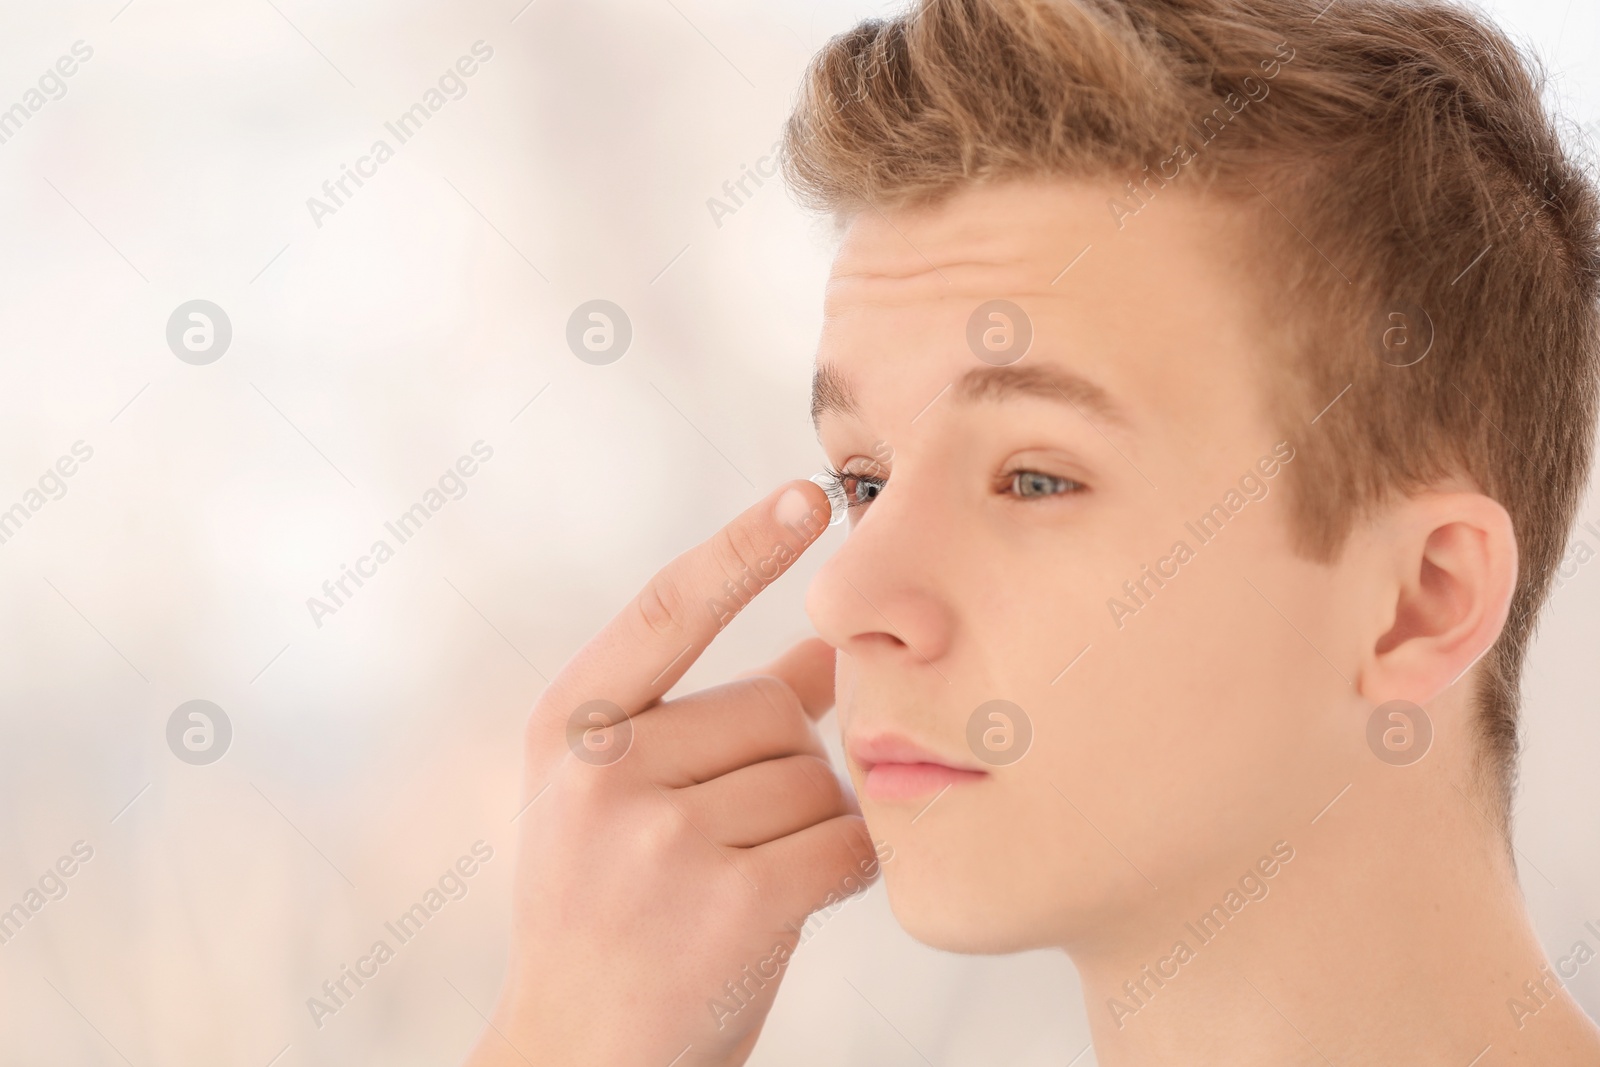 Photo of Teenage boy putting contact lens in his eye on blurred background